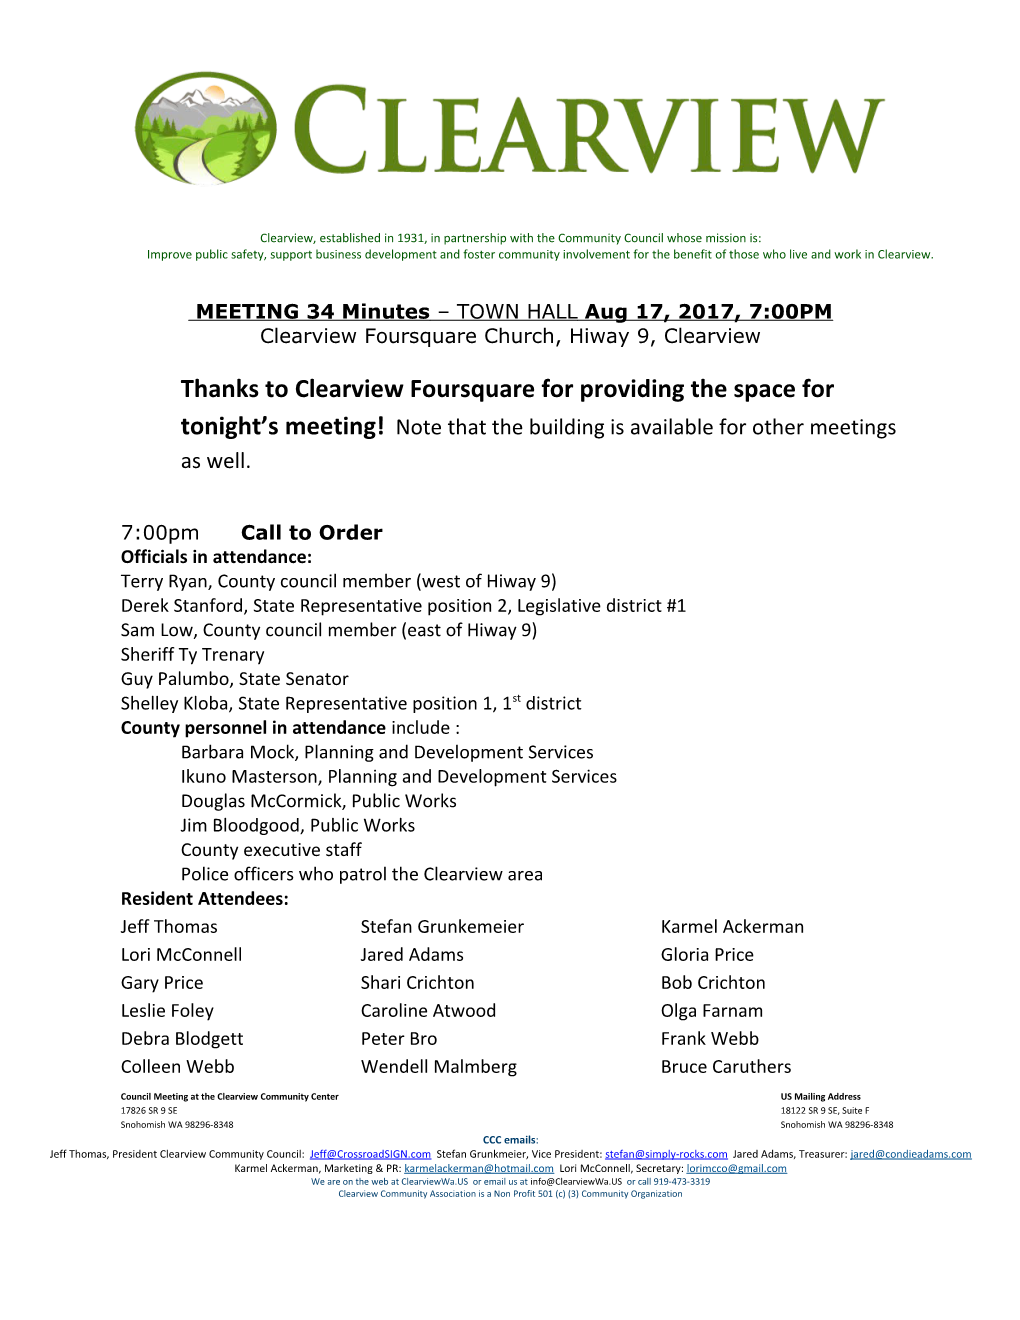 Clearview, Established in 1931, in Partnership with the Community Council Whose Mission Is